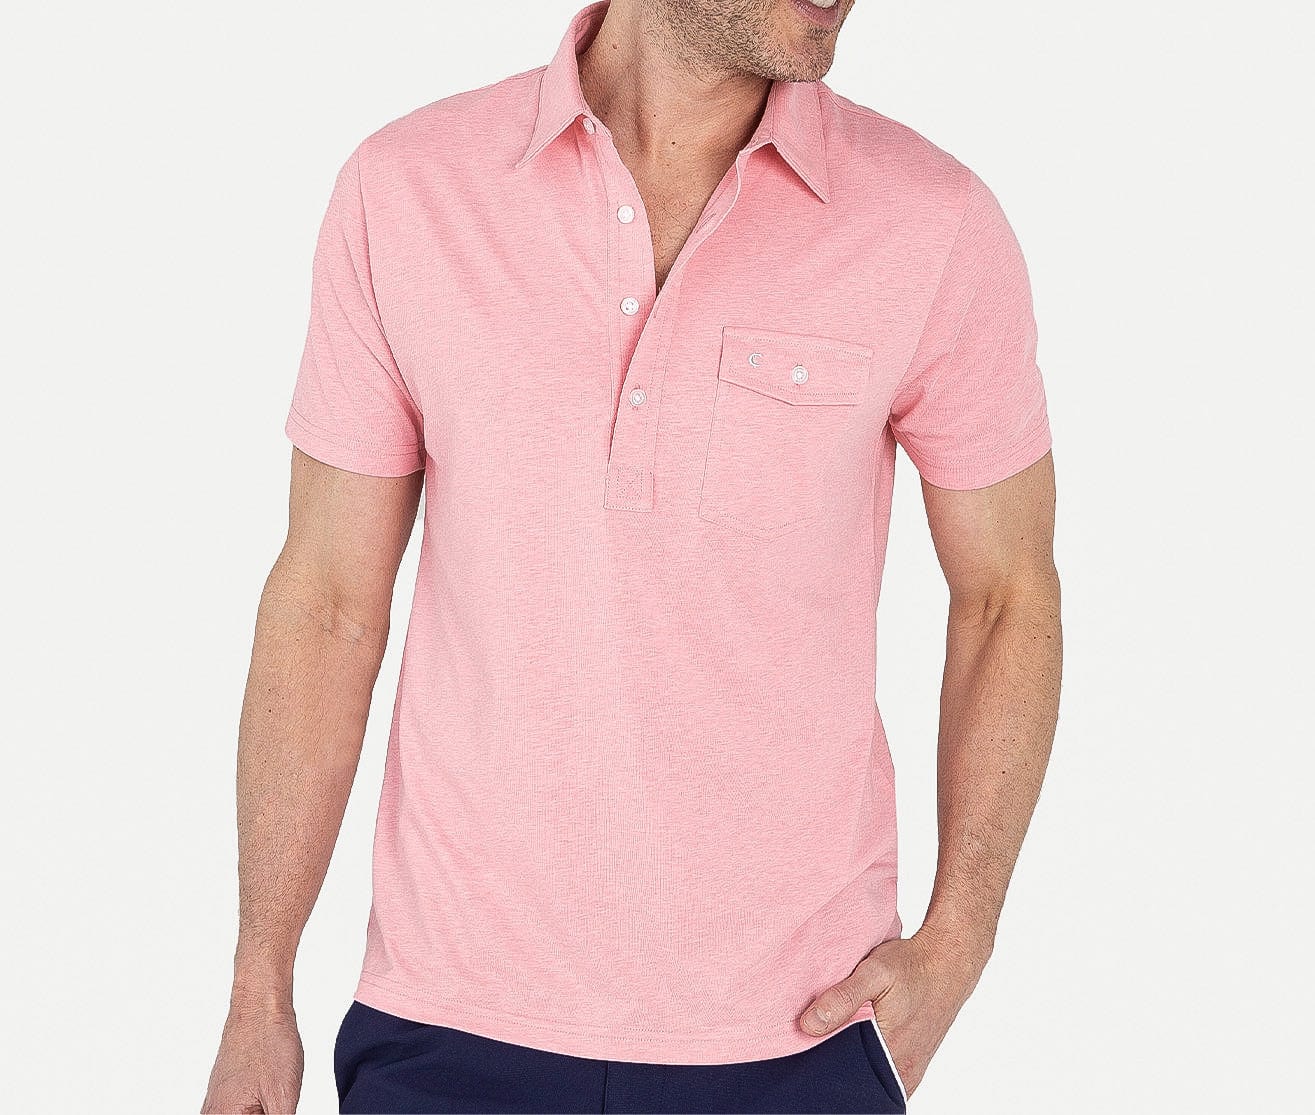 Slim Fit Performance Players Shirt - The Flamingo - Secondary